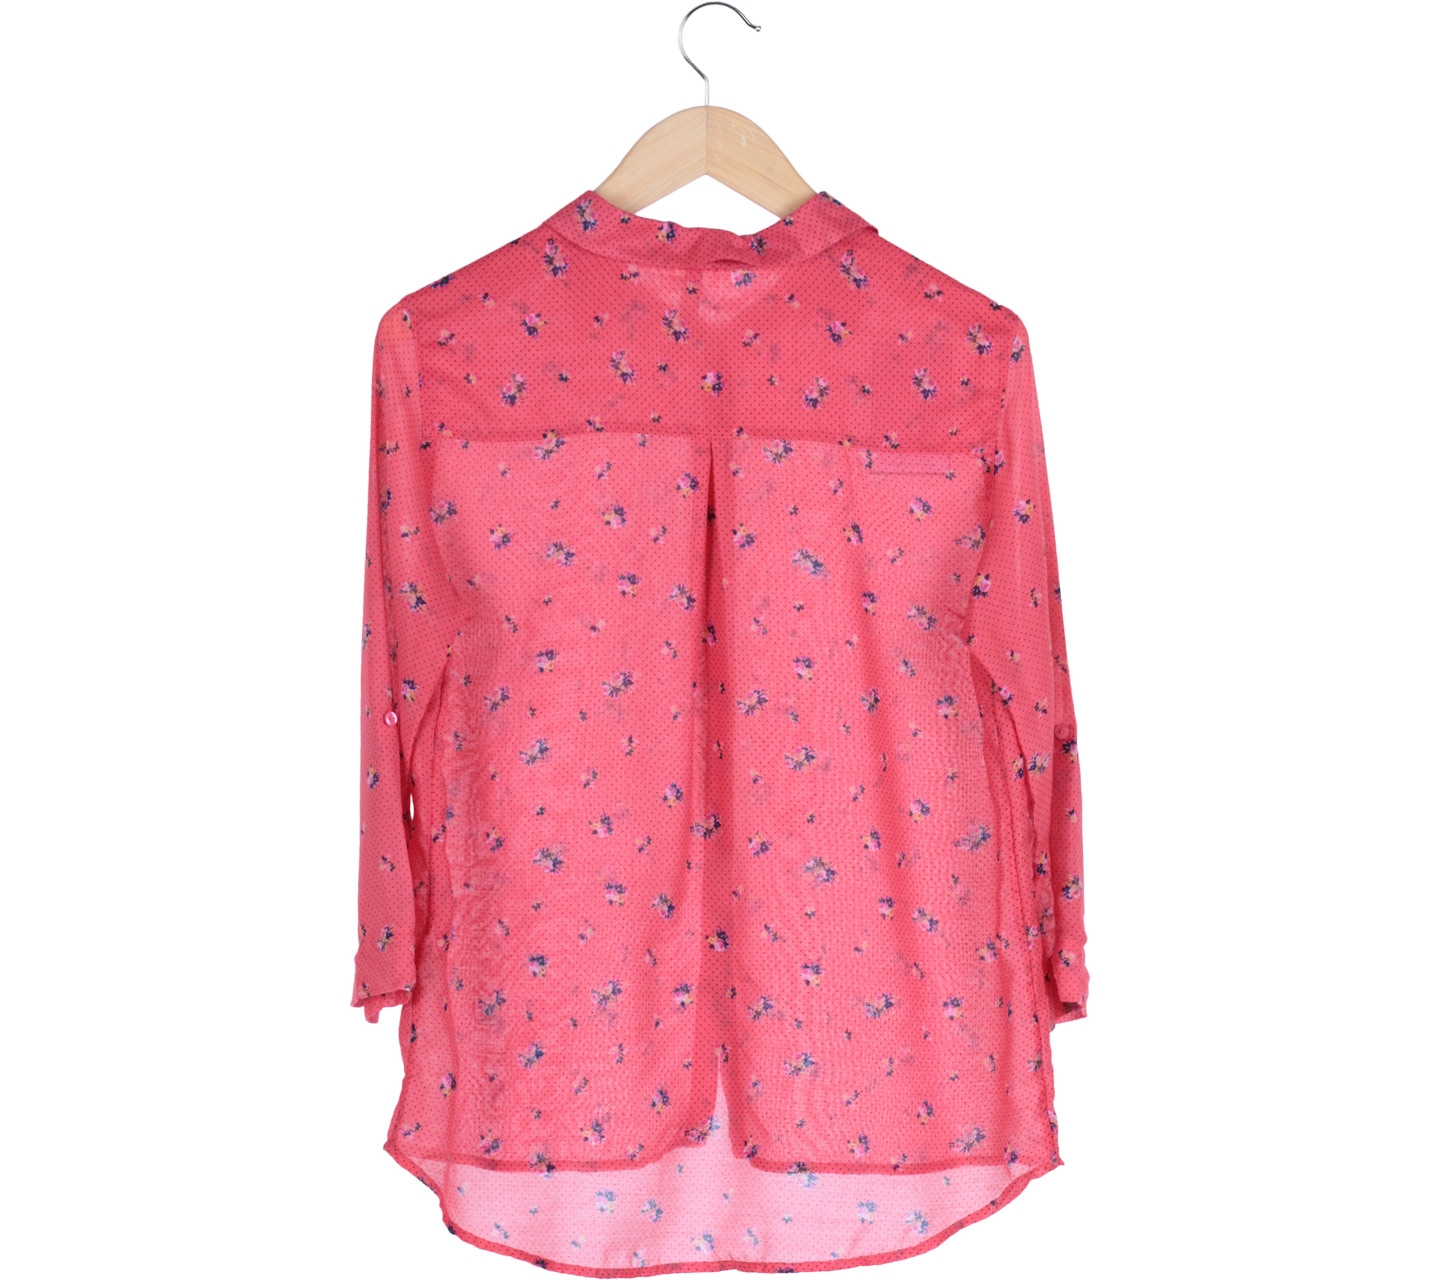 Stradivarius Red Floral Dotted Shirt